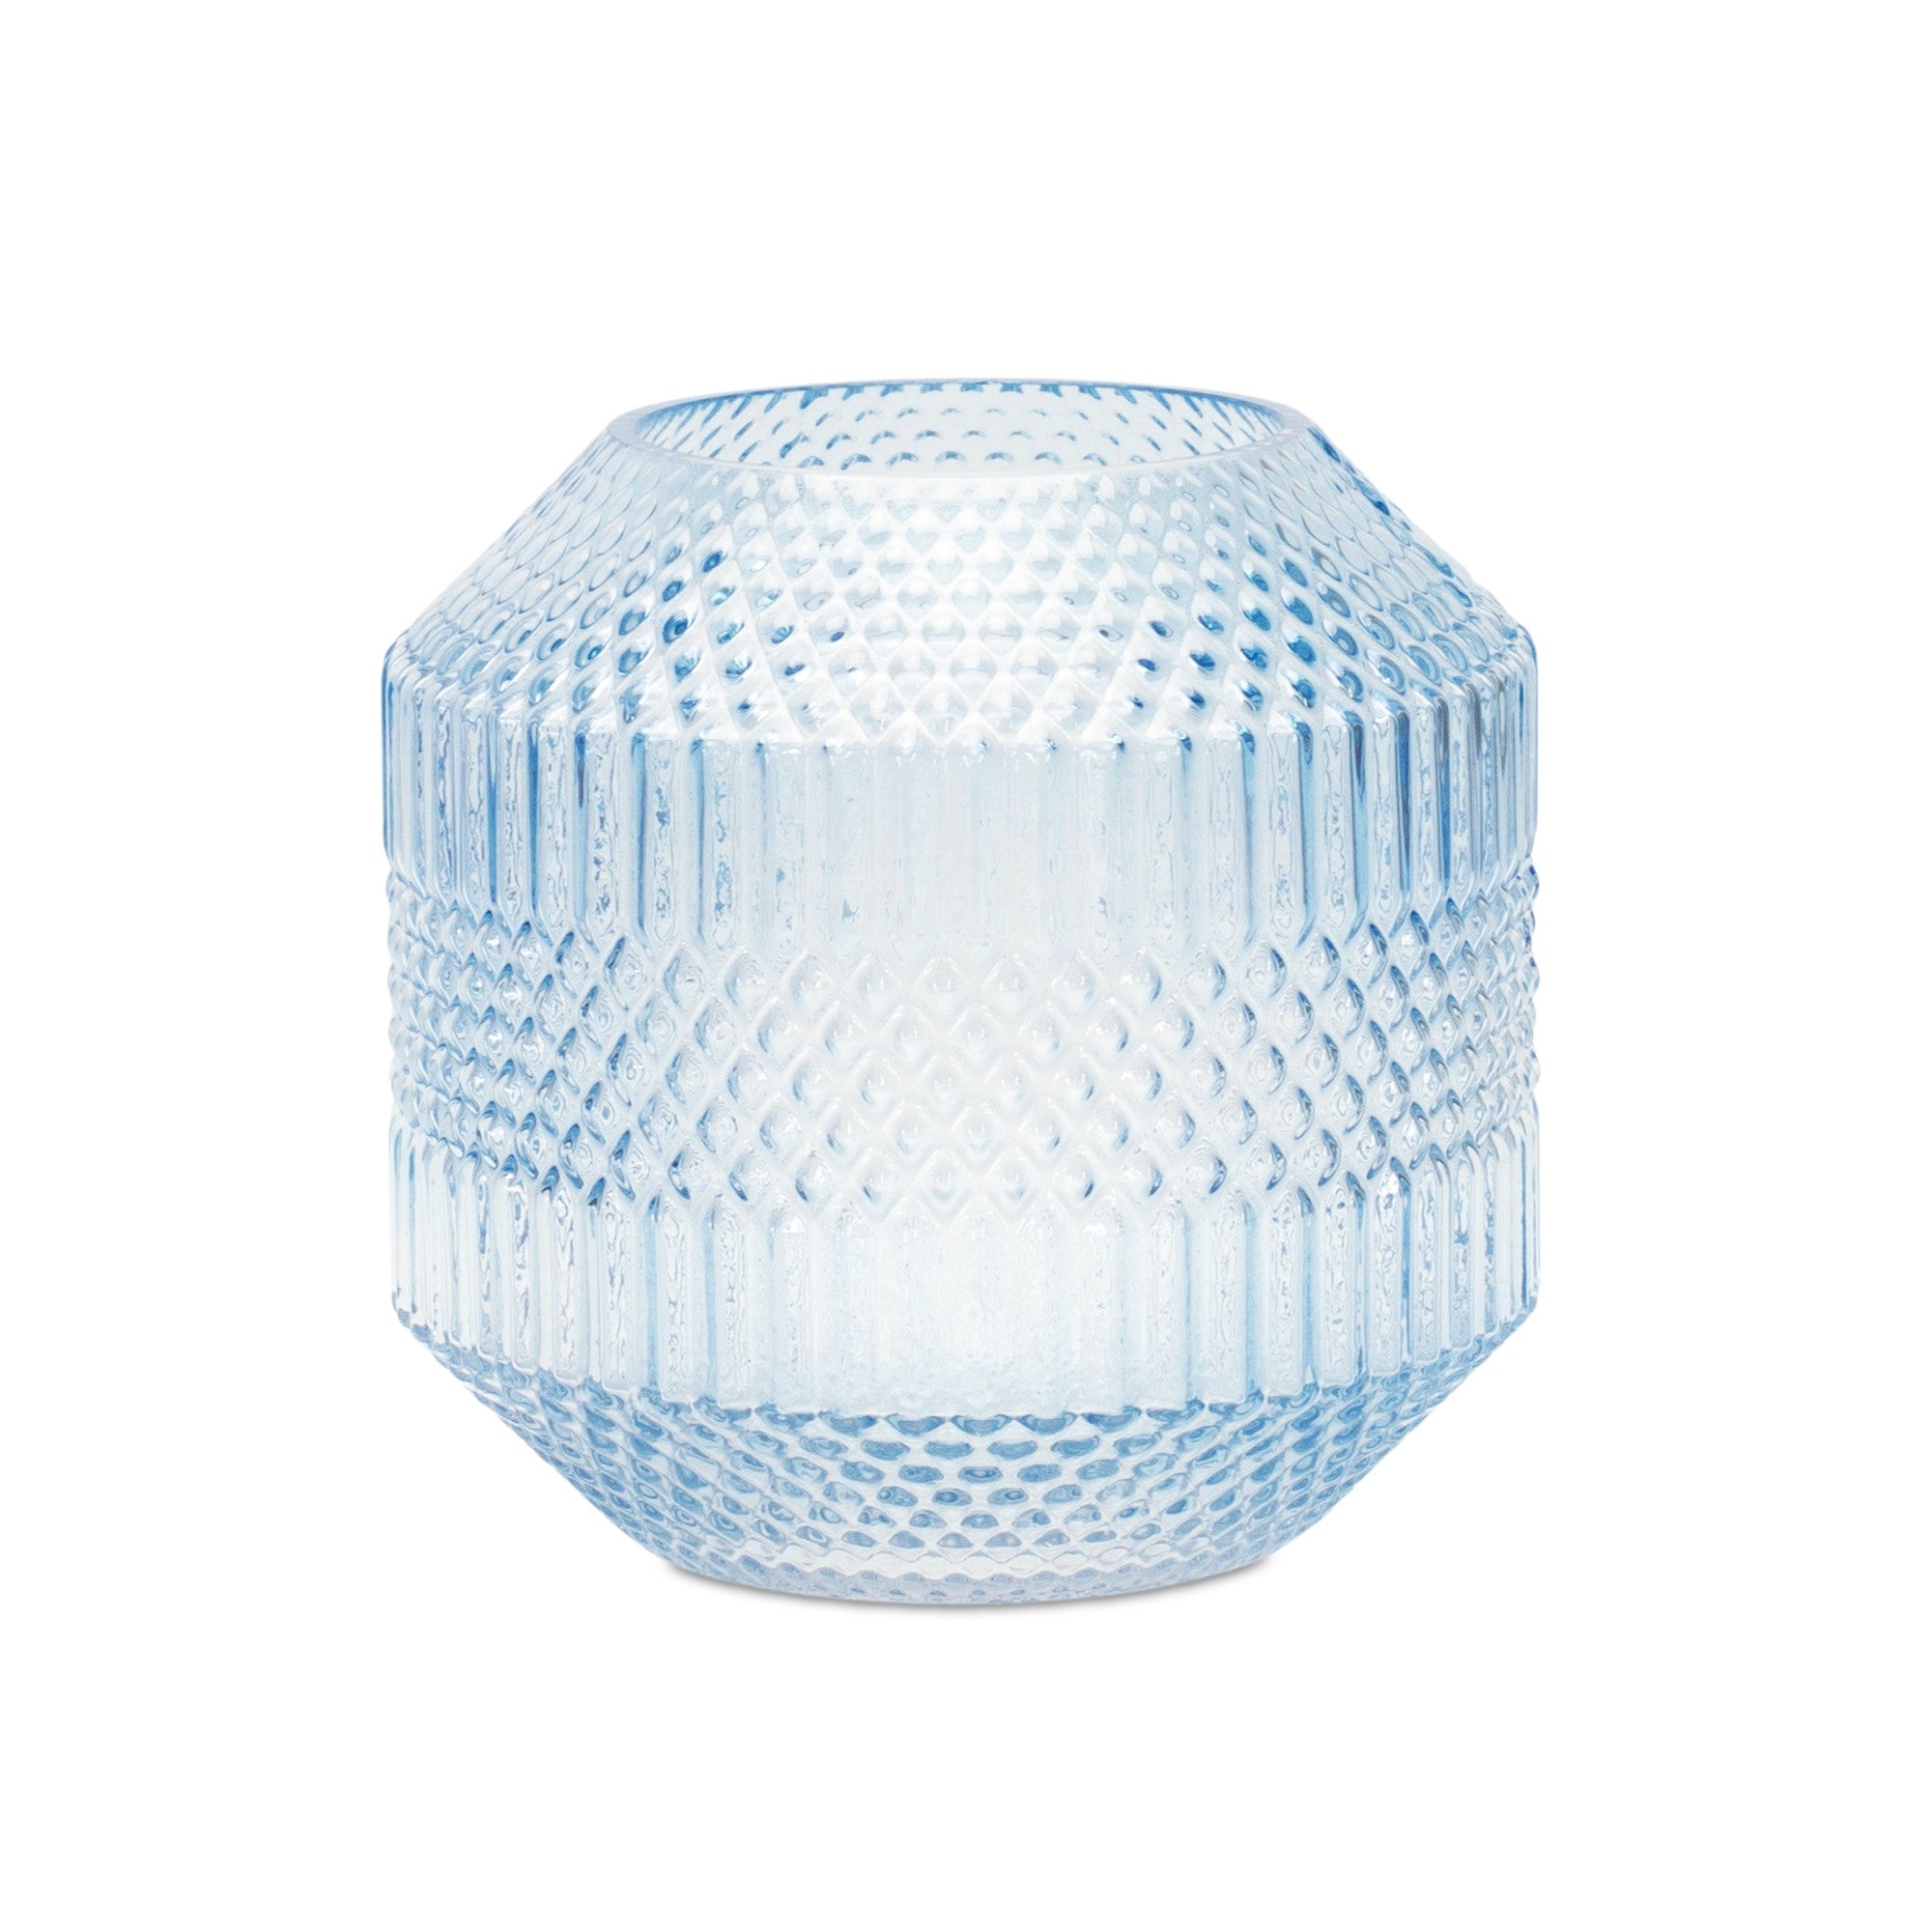 6.5" Crystal Glass Blue Round Table vase